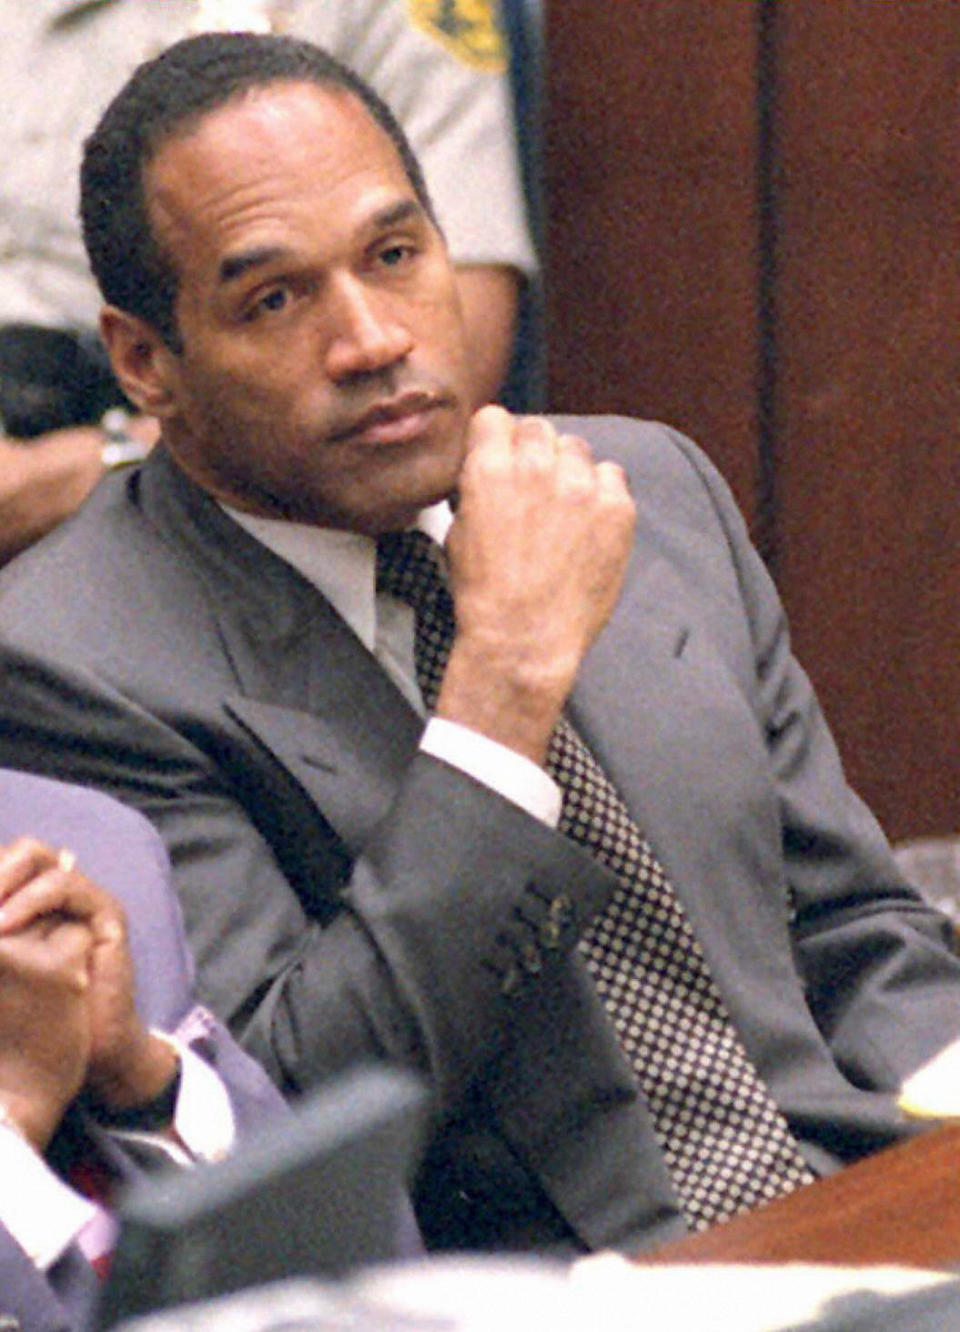 Former American football star and actor O.J. Simpson listens to testimony during his double murder trial in Los Angeles, March 16, 1995. Simpson is on trial for the homicide of his ex-wife Nicole Brown Simpson and her friend Ron Goldman. In this image he listens to the testimony of Lieutenant Philip Vannatter, one of the two lead detectives on the case. - Credit: Dan Mircobich/AFP/Getty Images